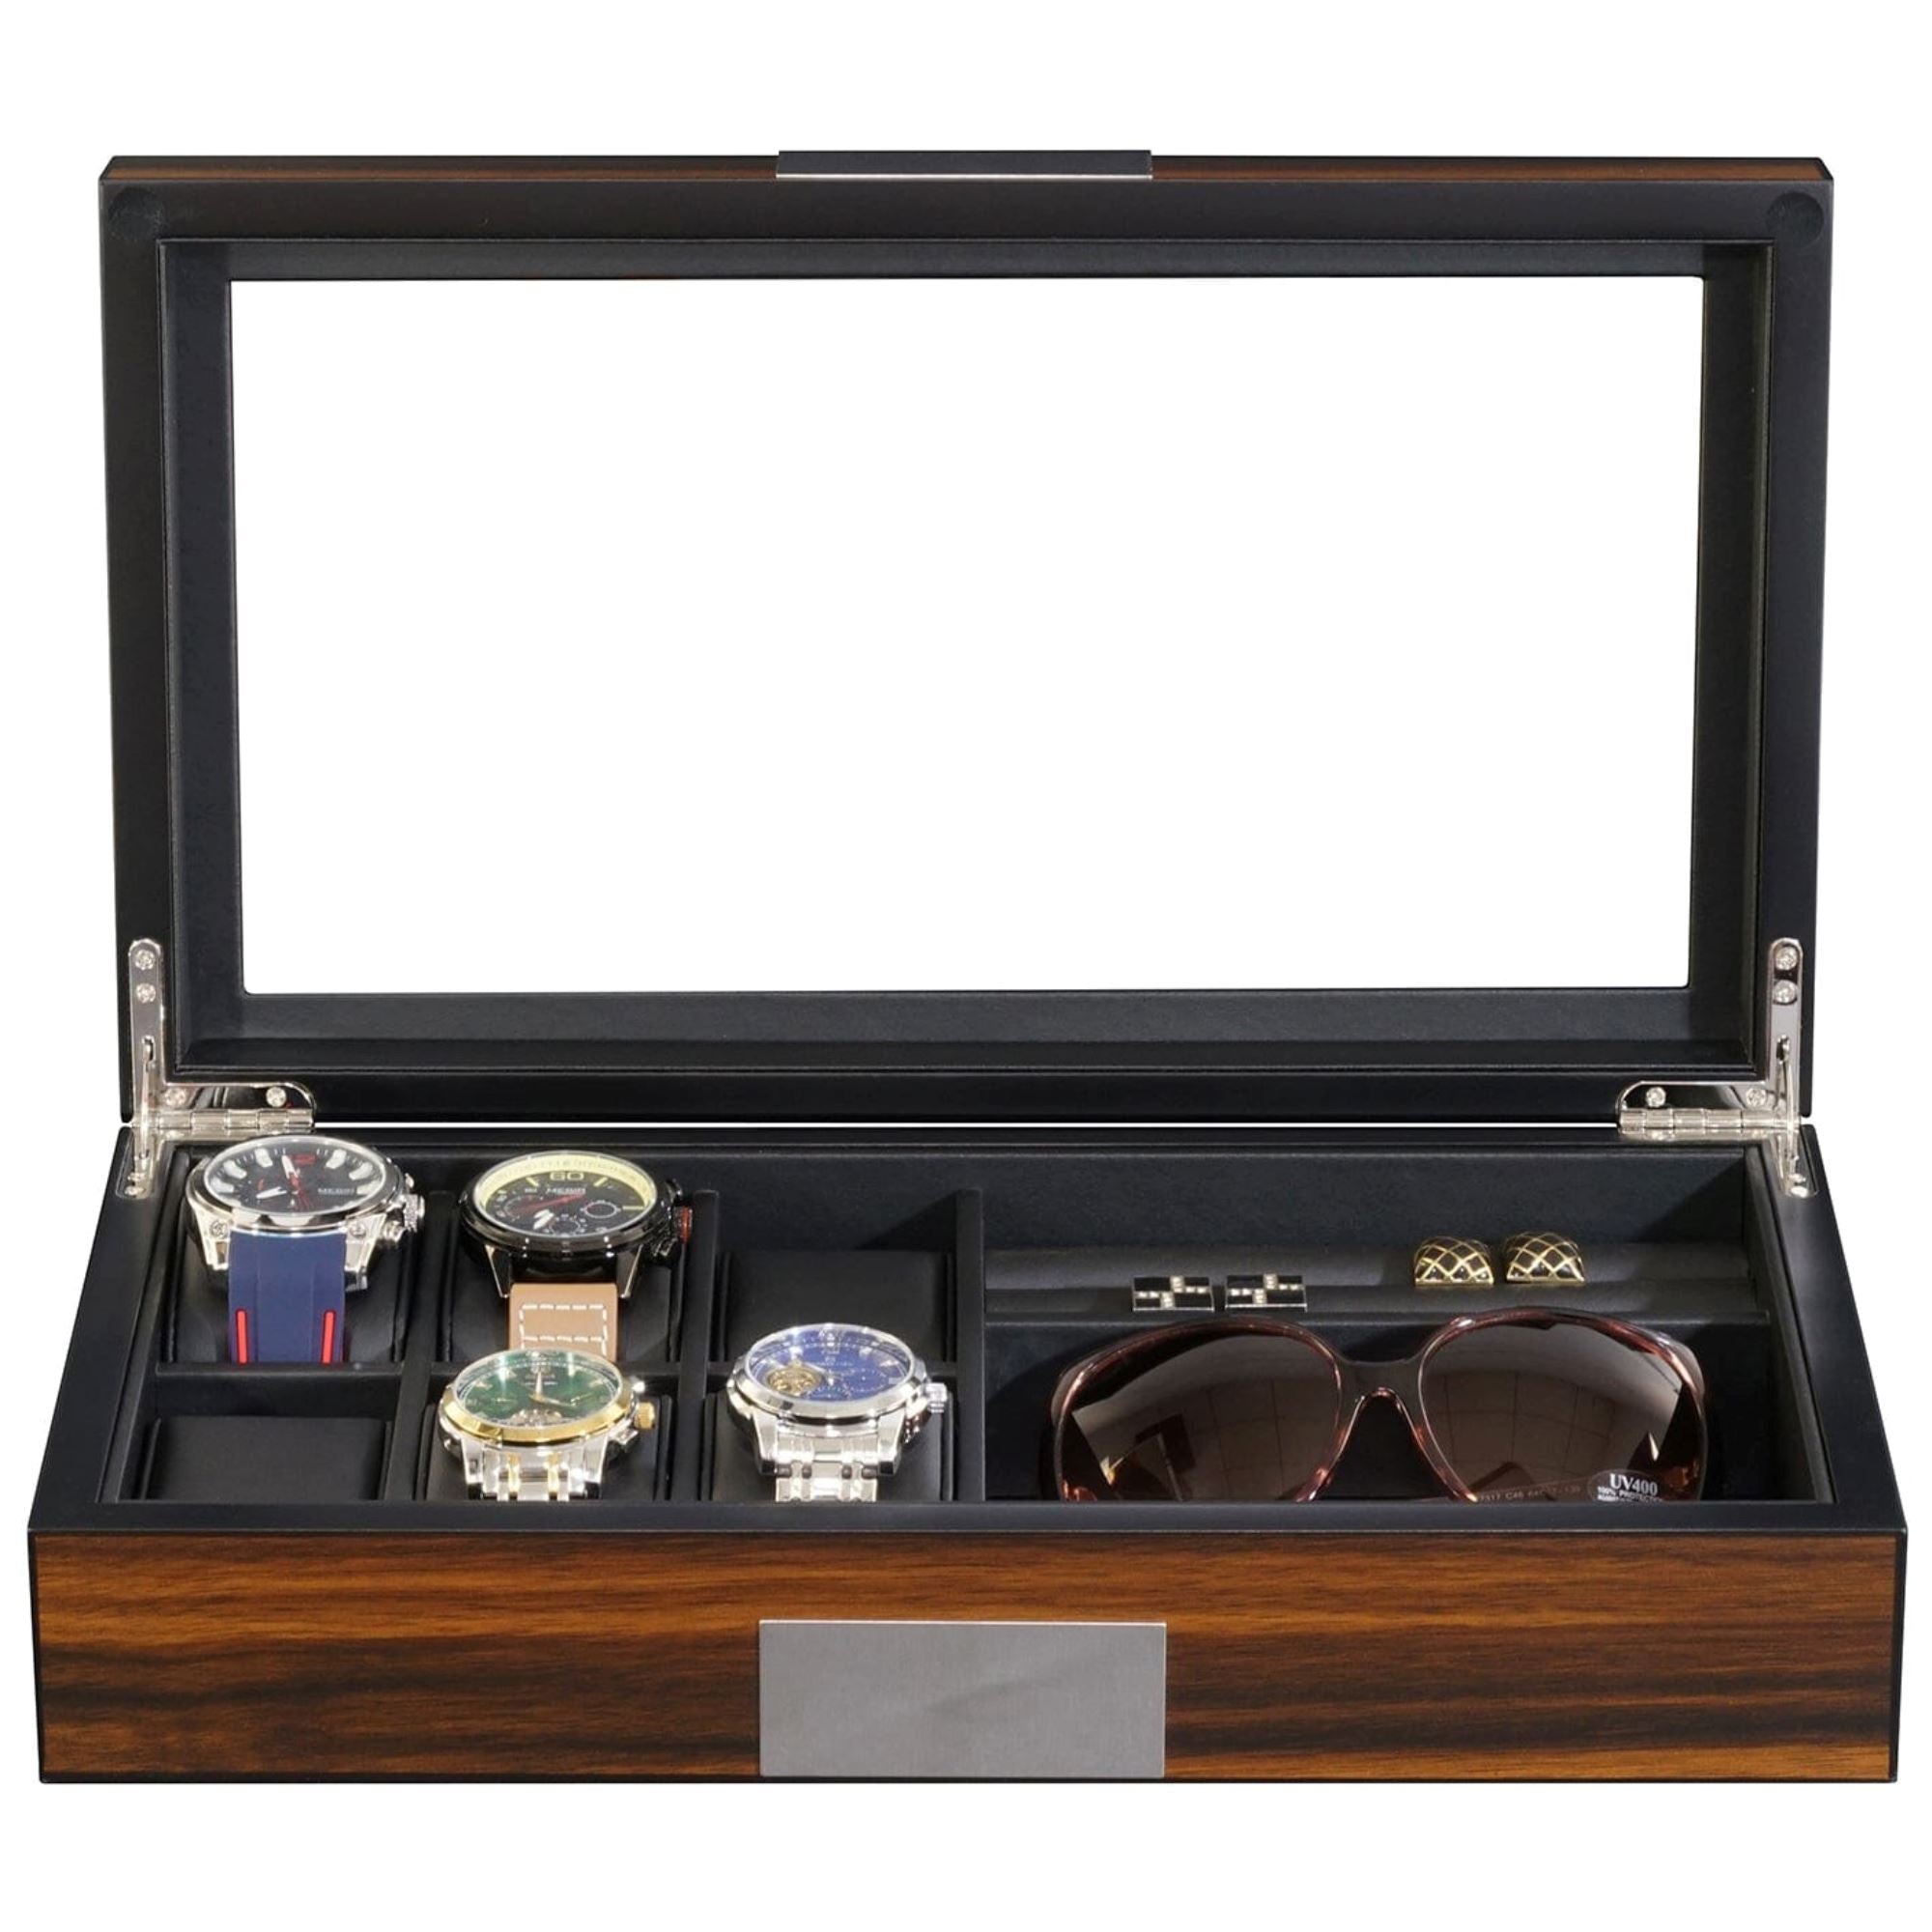 6 Slots Watch Box with Cufflinks and Sunglasses Storage in Ebony Wood Watch Boxes Clinks 